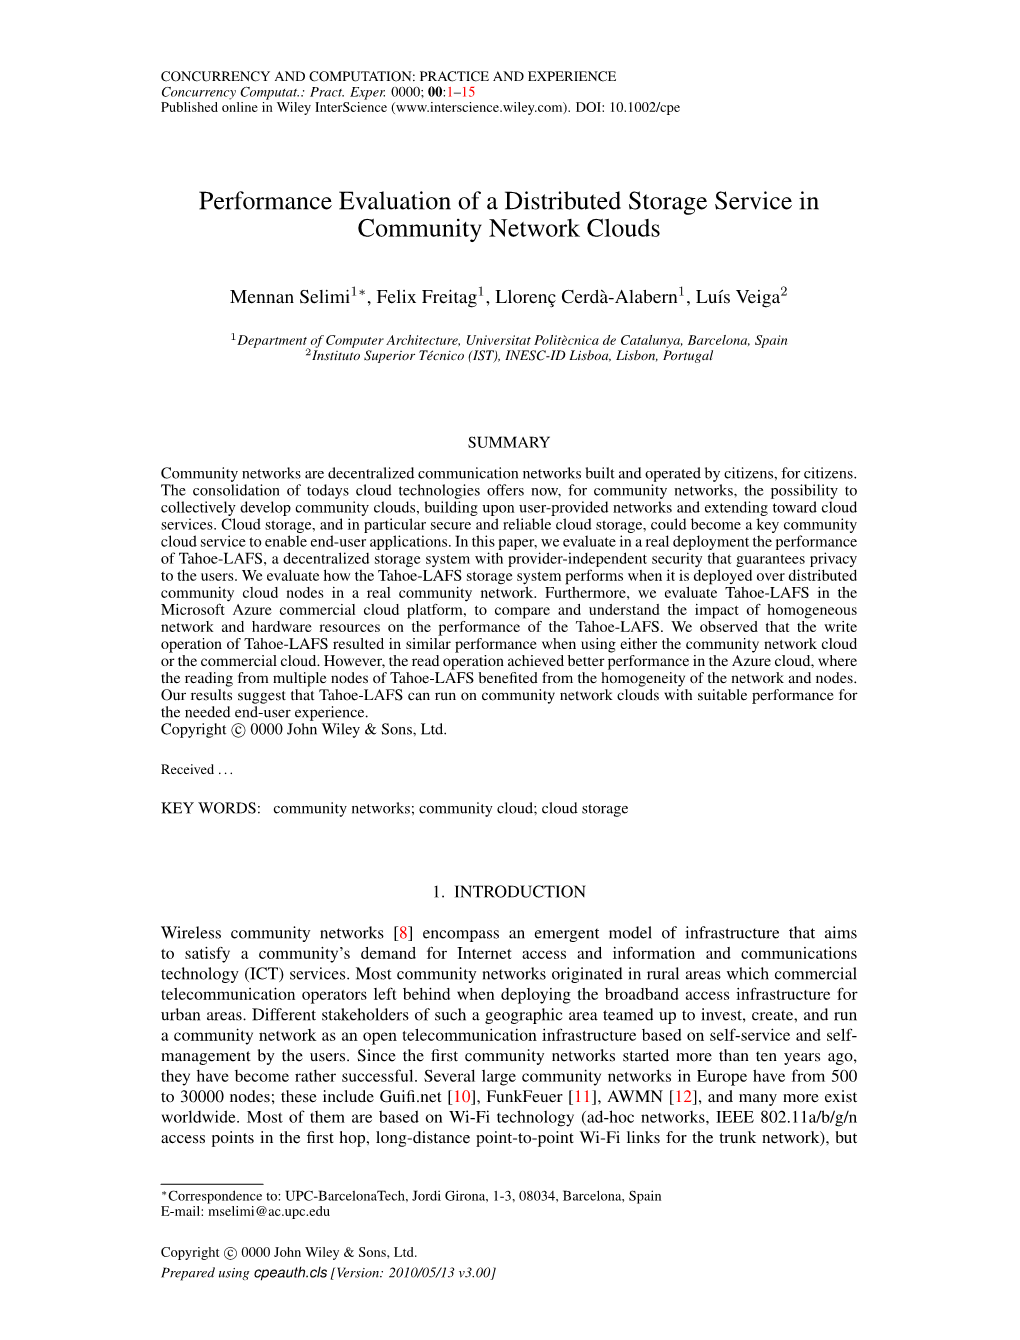 Performance Evaluation of a Distributed Storage Service in Community Network Clouds